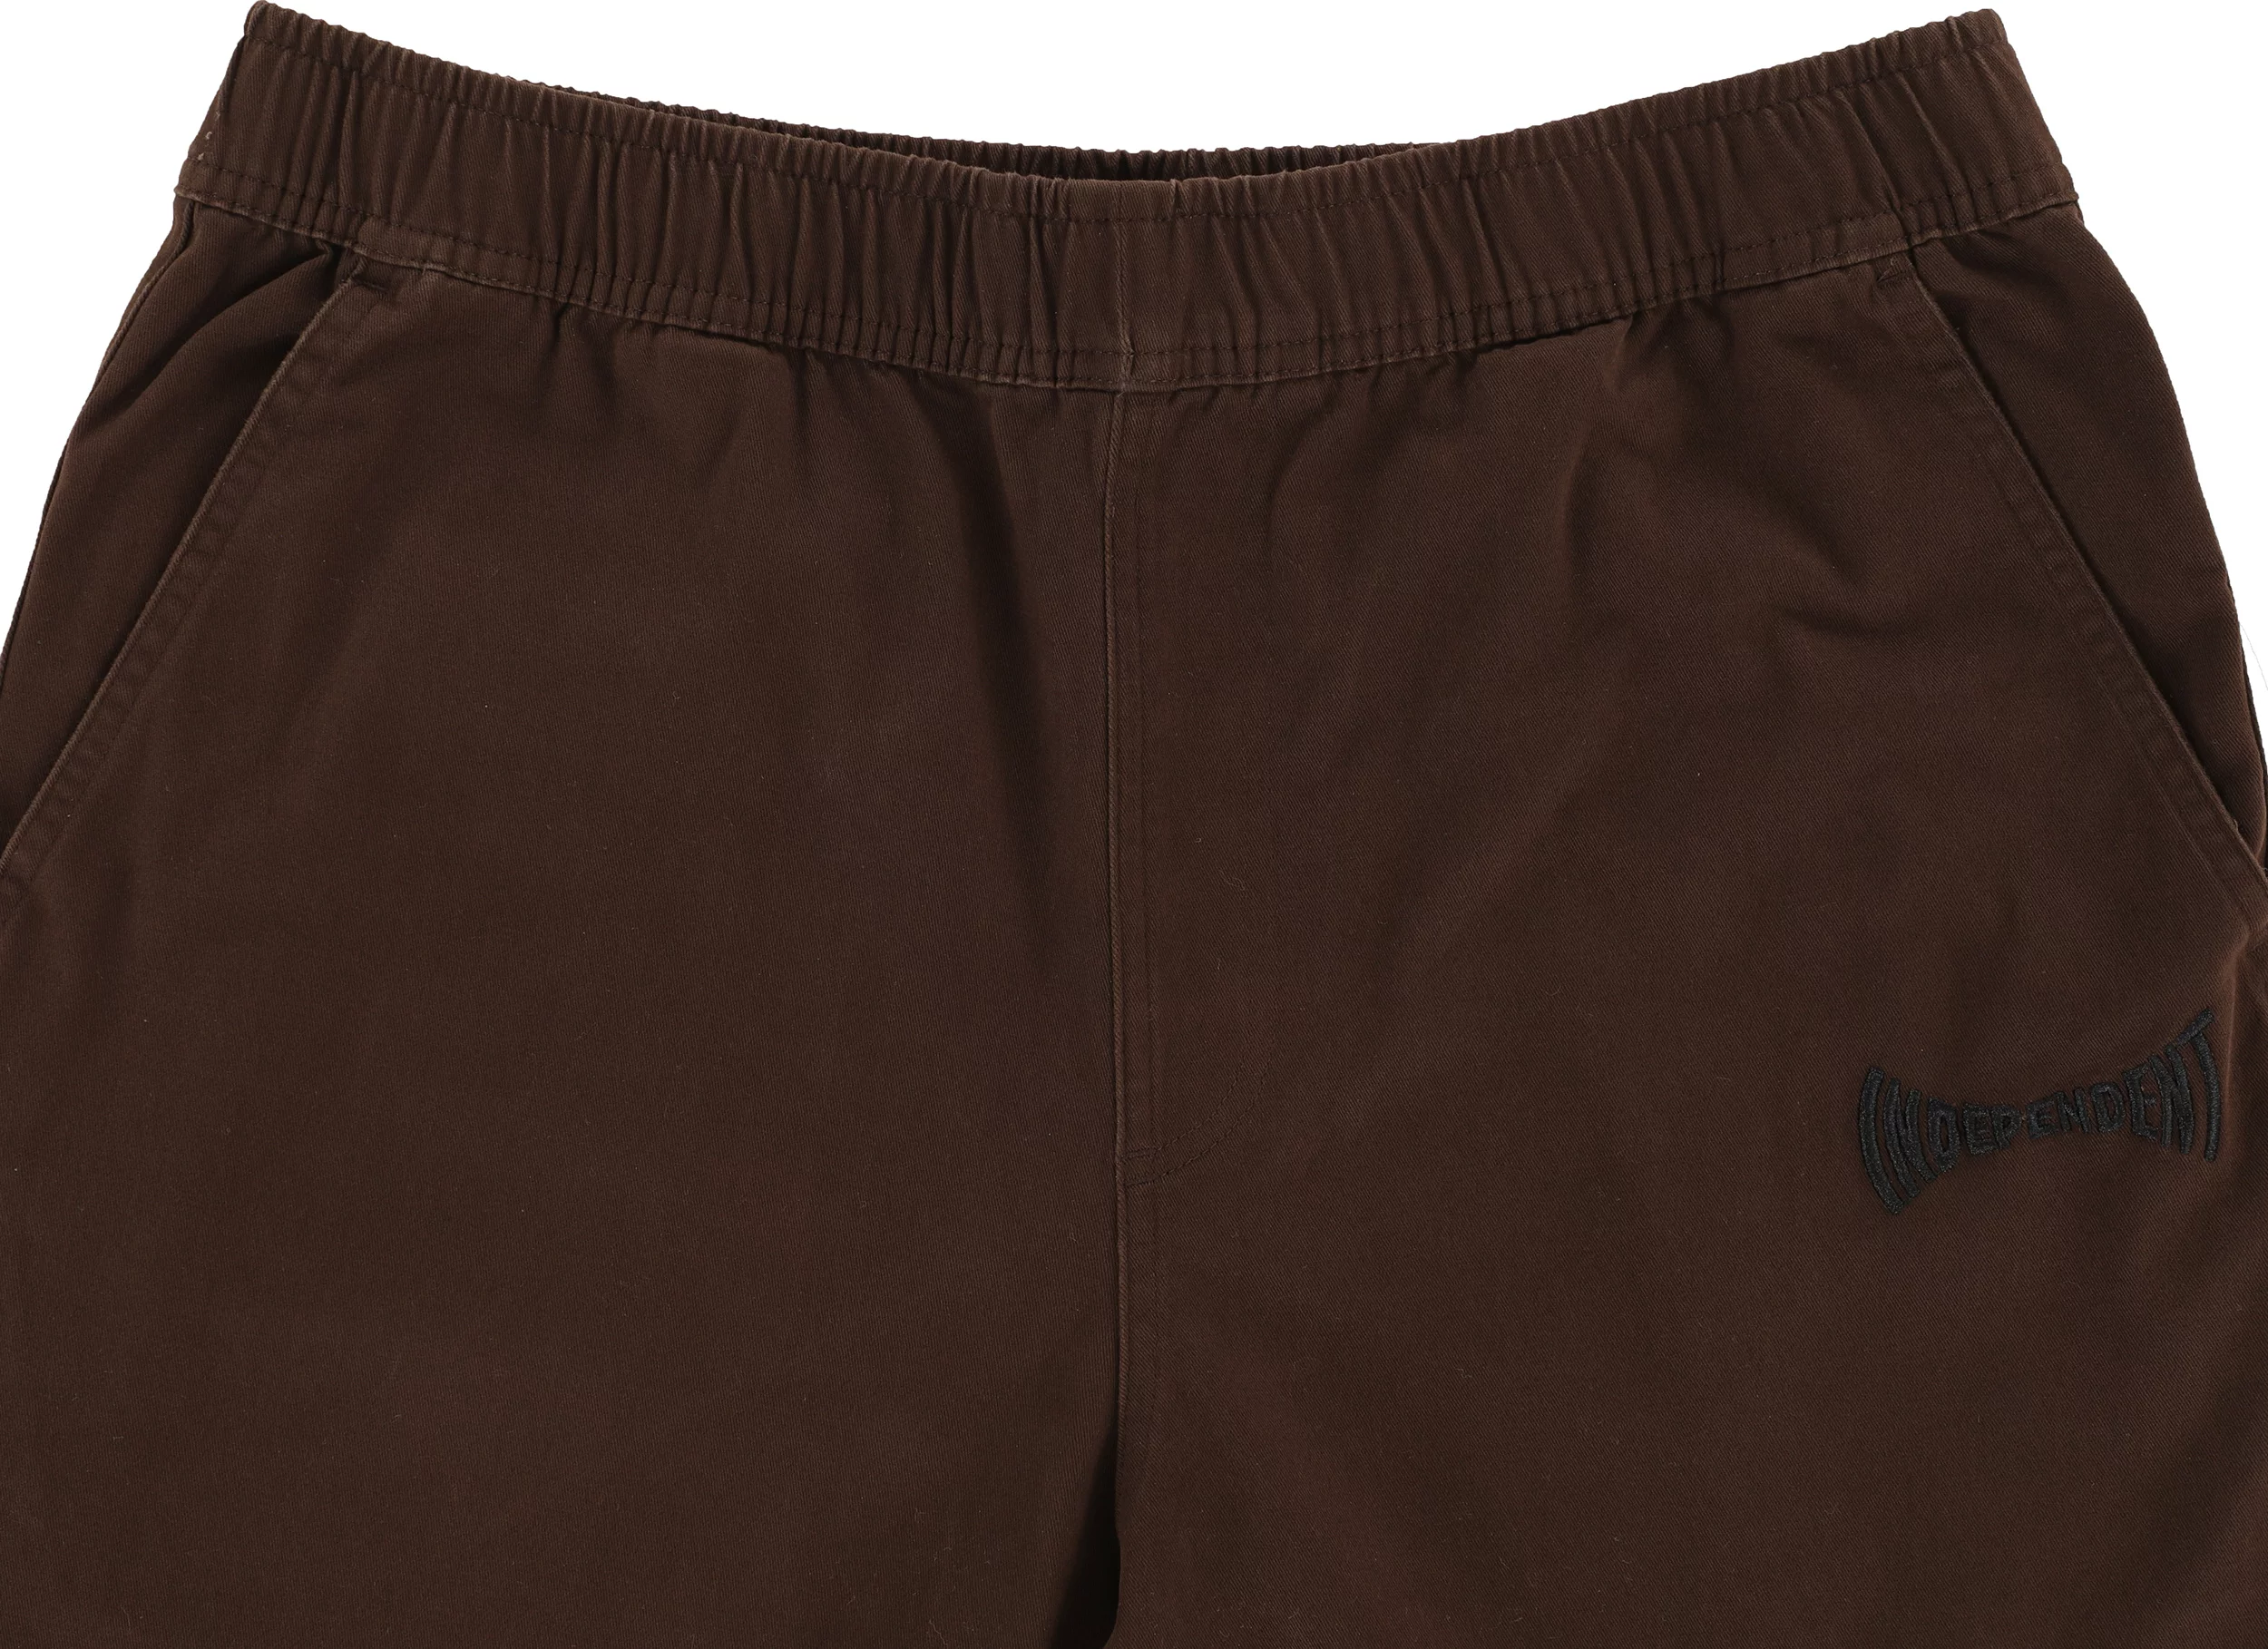 Buy Brown Trousers & Pants for Men by INDEPENDENCE Online